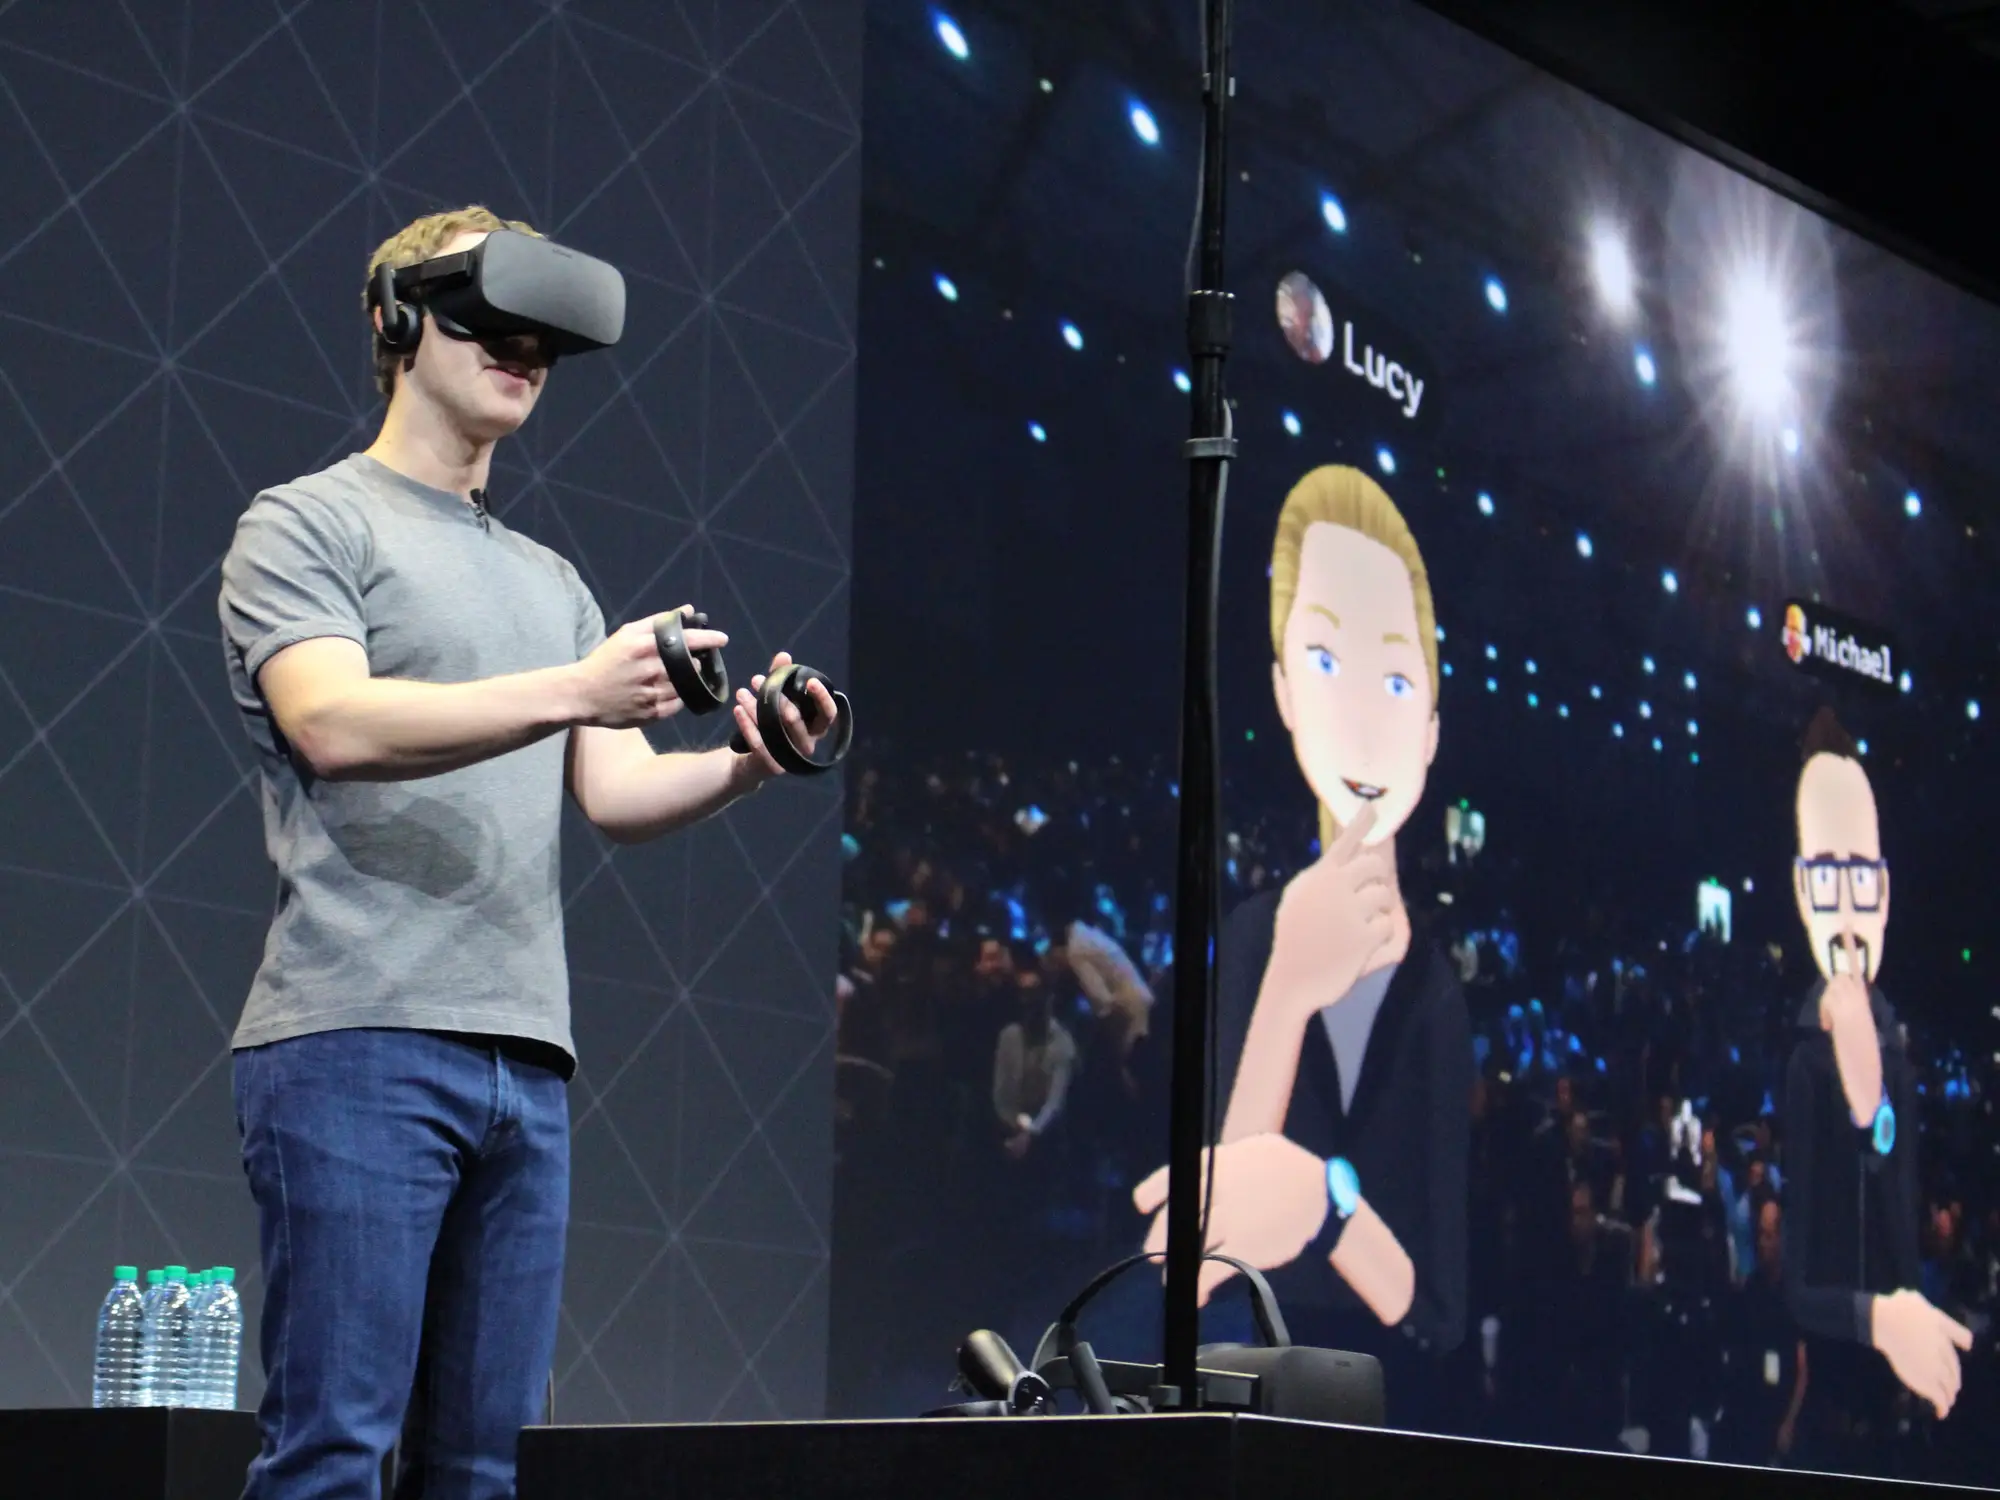 Facebook CEO Mark Zuckerberg on stage at an Oculus developers conference in 2016. Glenn Chapmann/AFP via Getty Images